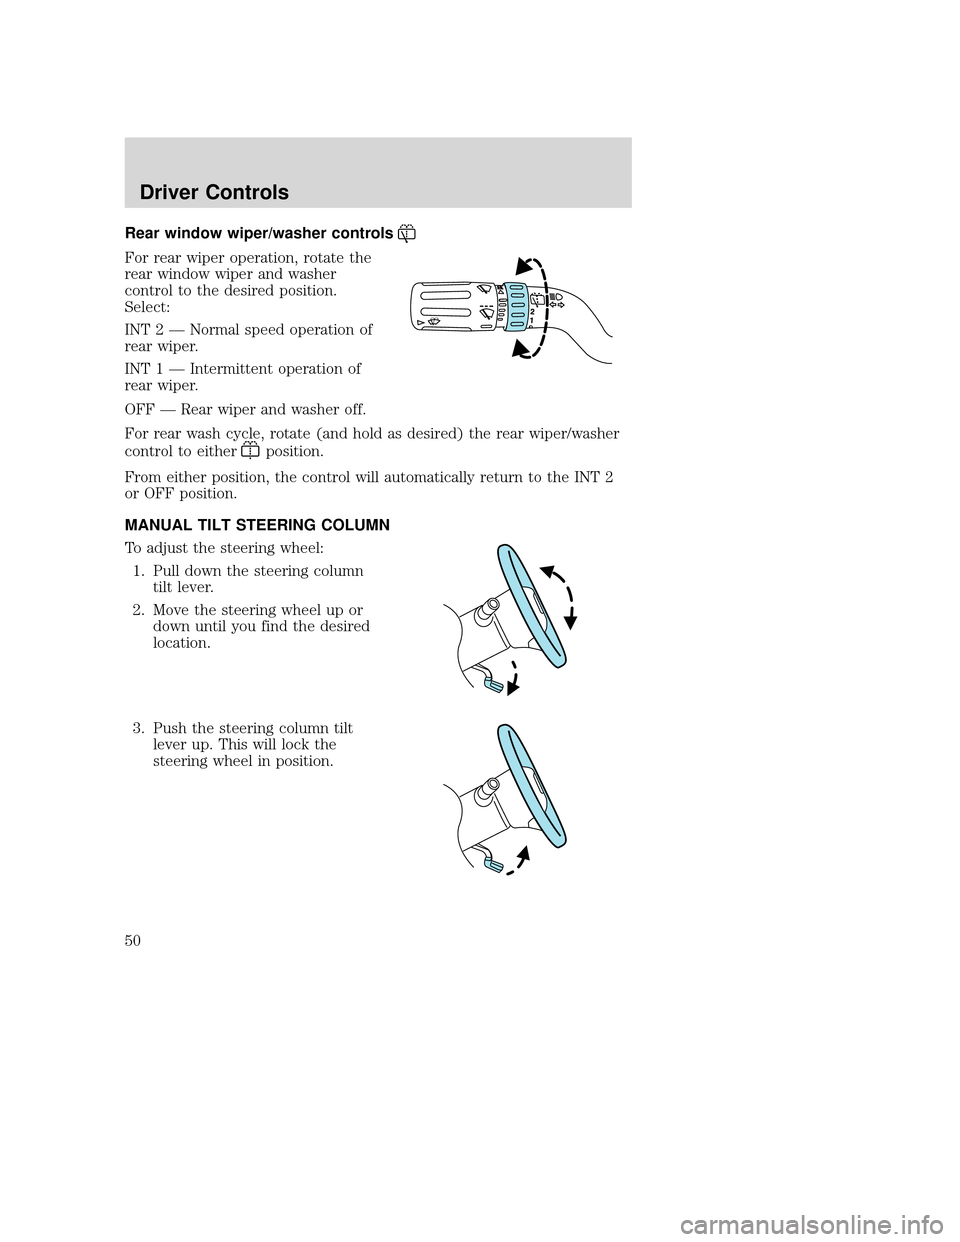 MAZDA MODEL TRIBUTE 2009  Owners Manual (in English) Rear window wiper/washer controls
For rear wiper operation, rotate the
rear window wiper and washer
control to the desired position.
Select:
INT 2 — Normal speed operation of
rear wiper.
INT 1 — I